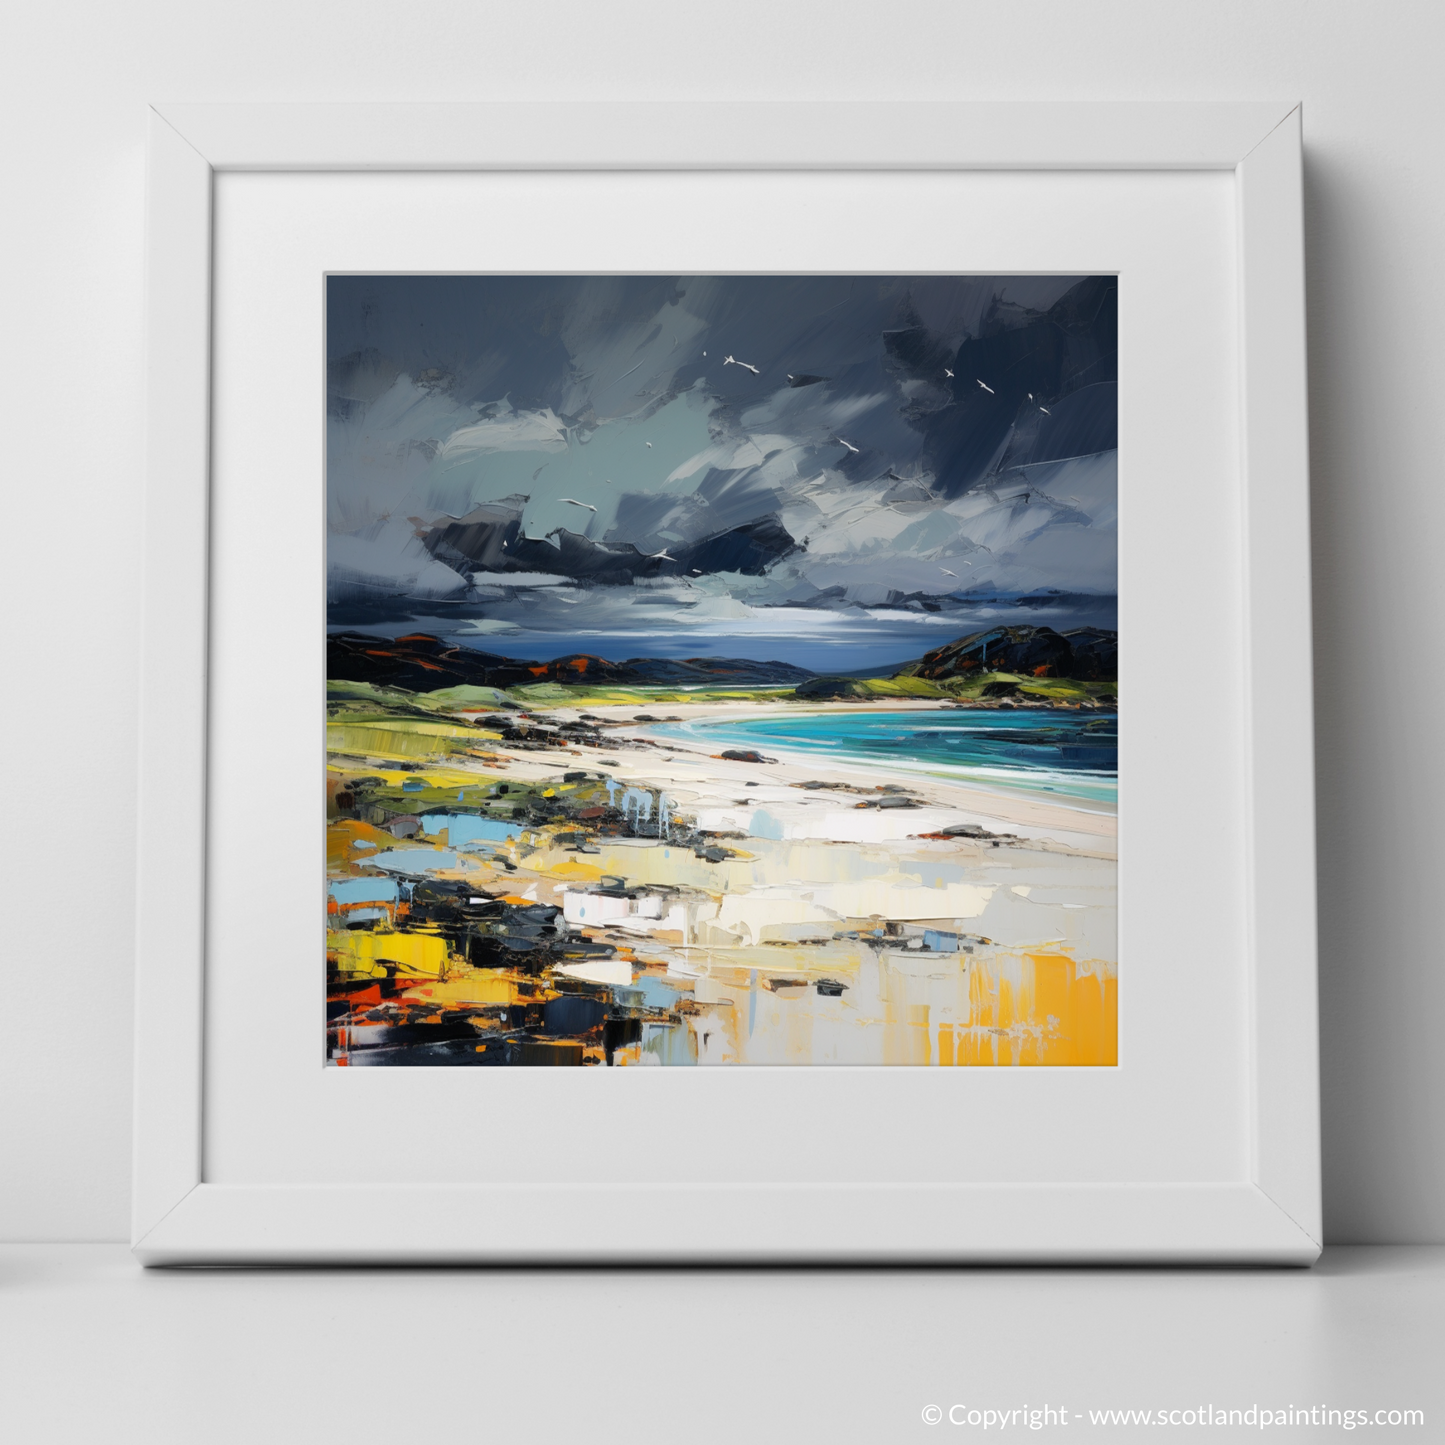 Art Print of Arisaig Beach with a stormy sky with a white frame